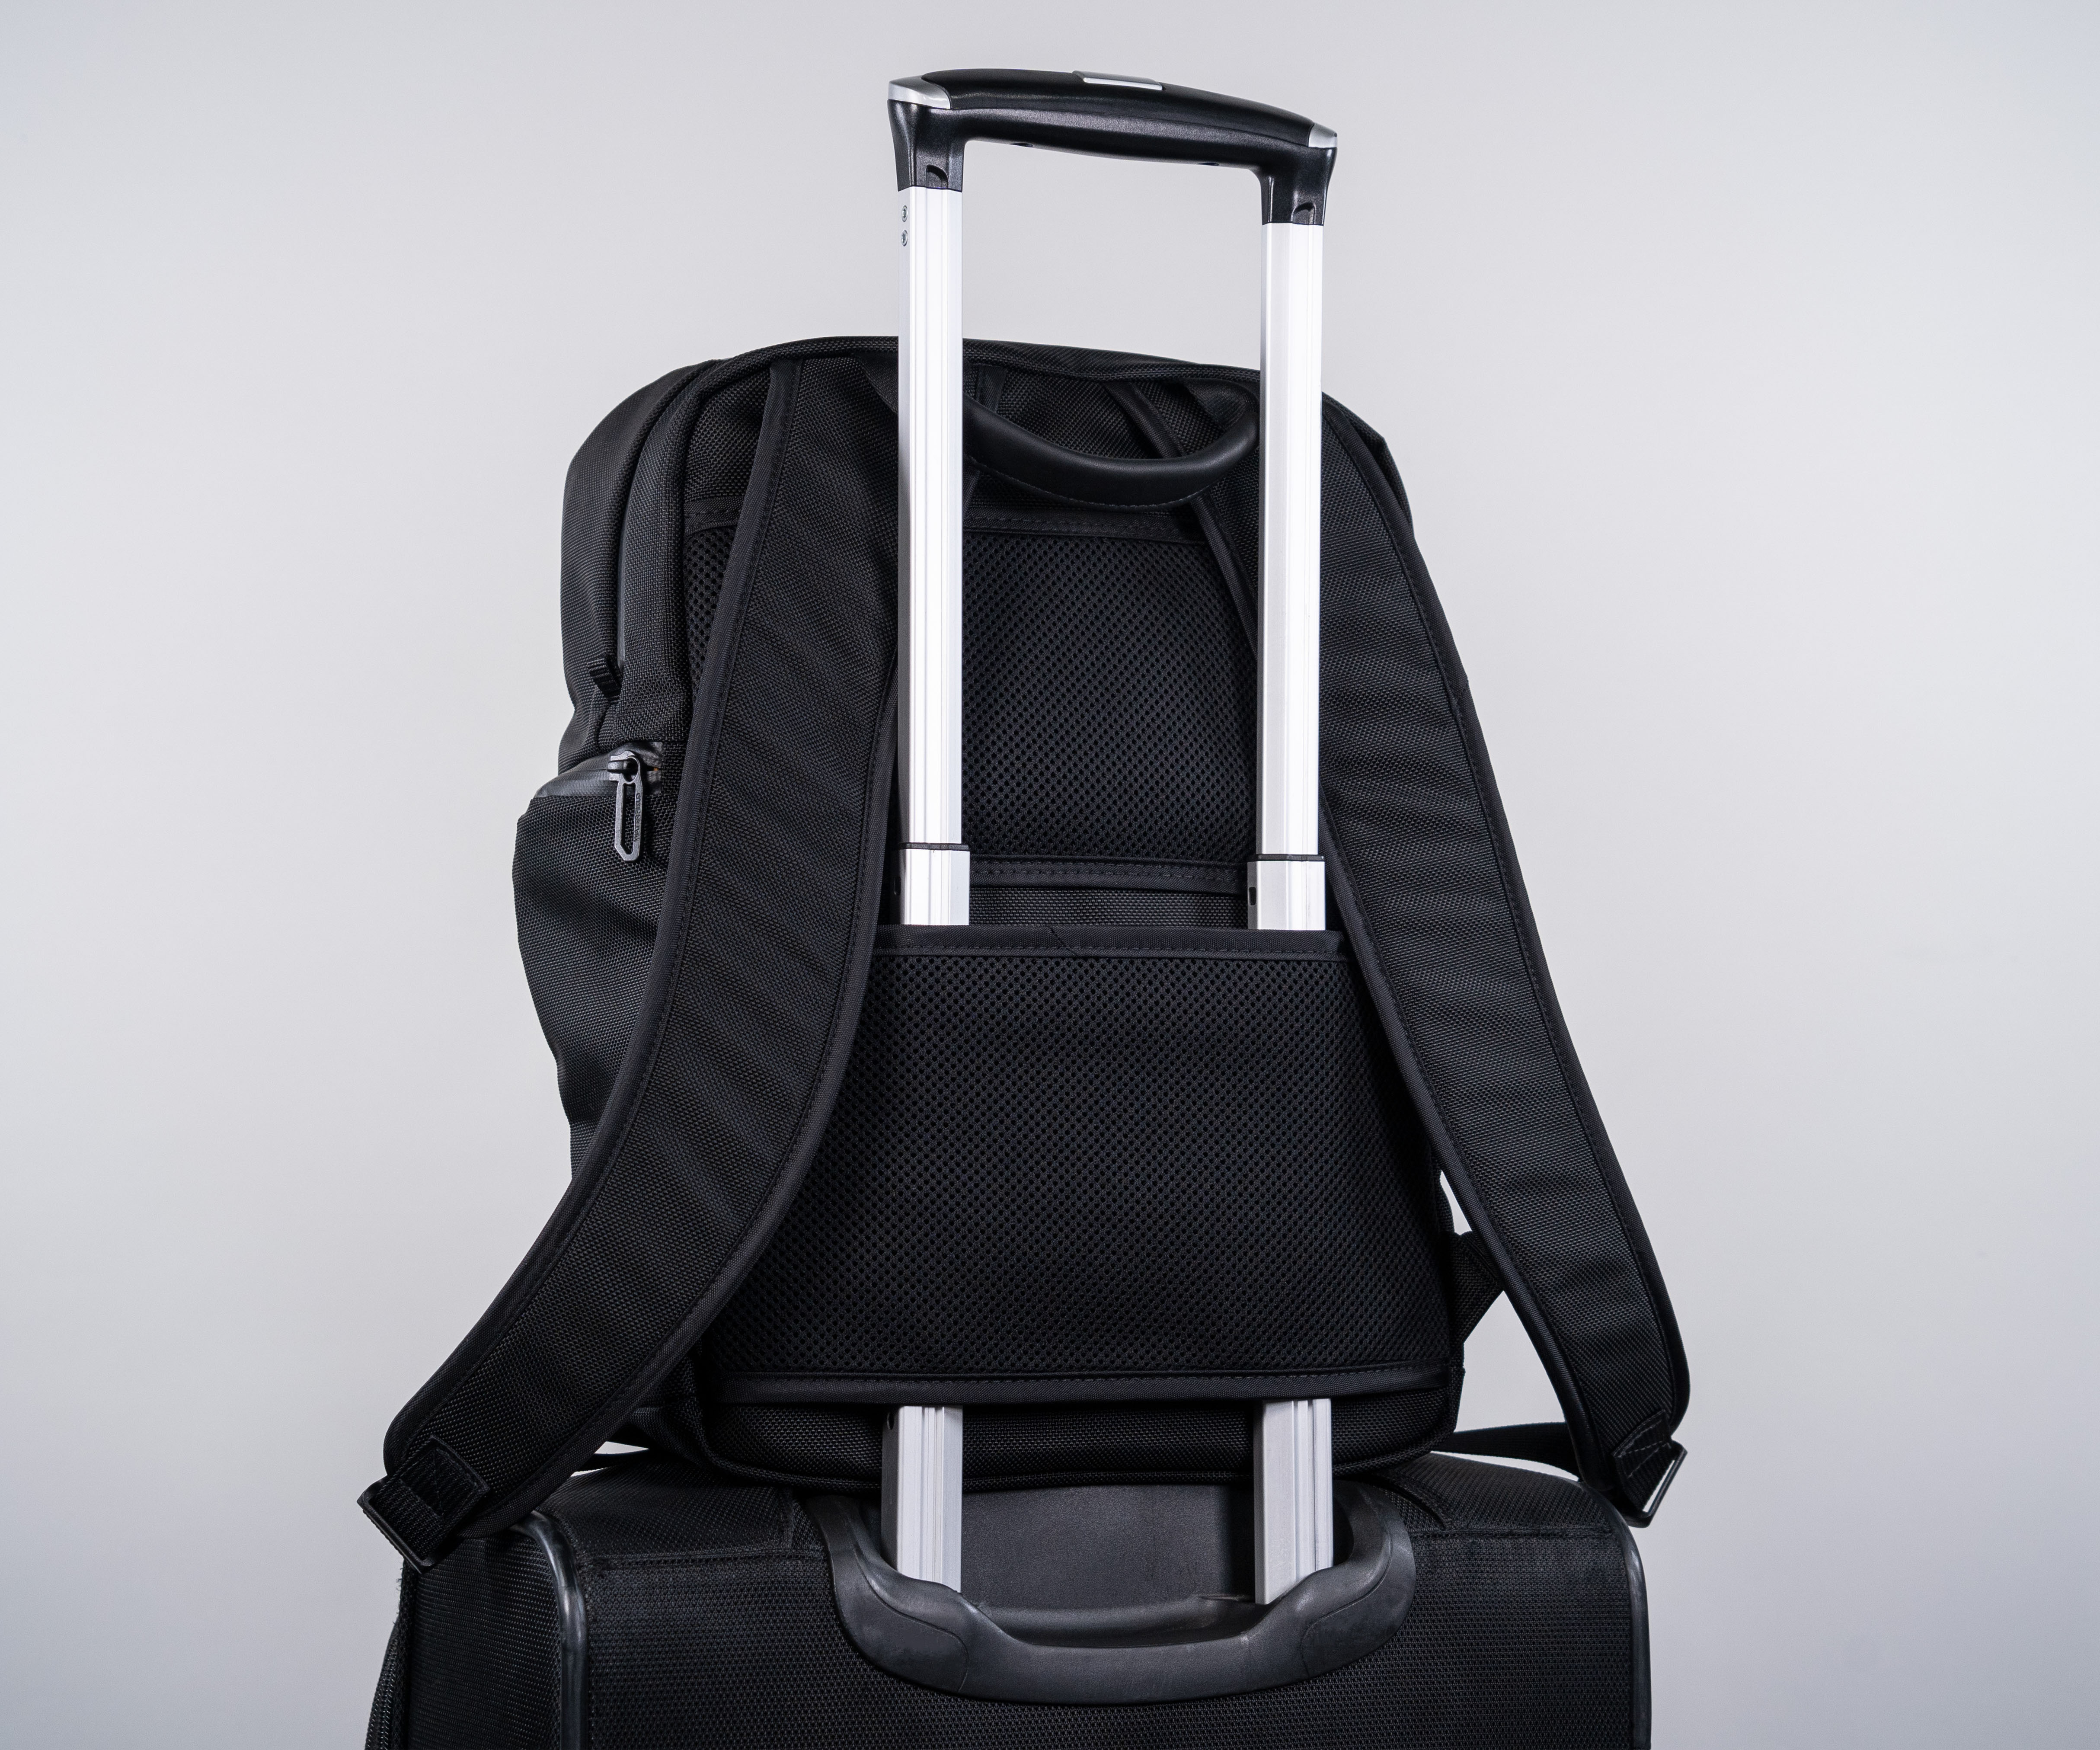 Padded mesh panel doubles as suitcases handle pass-through.